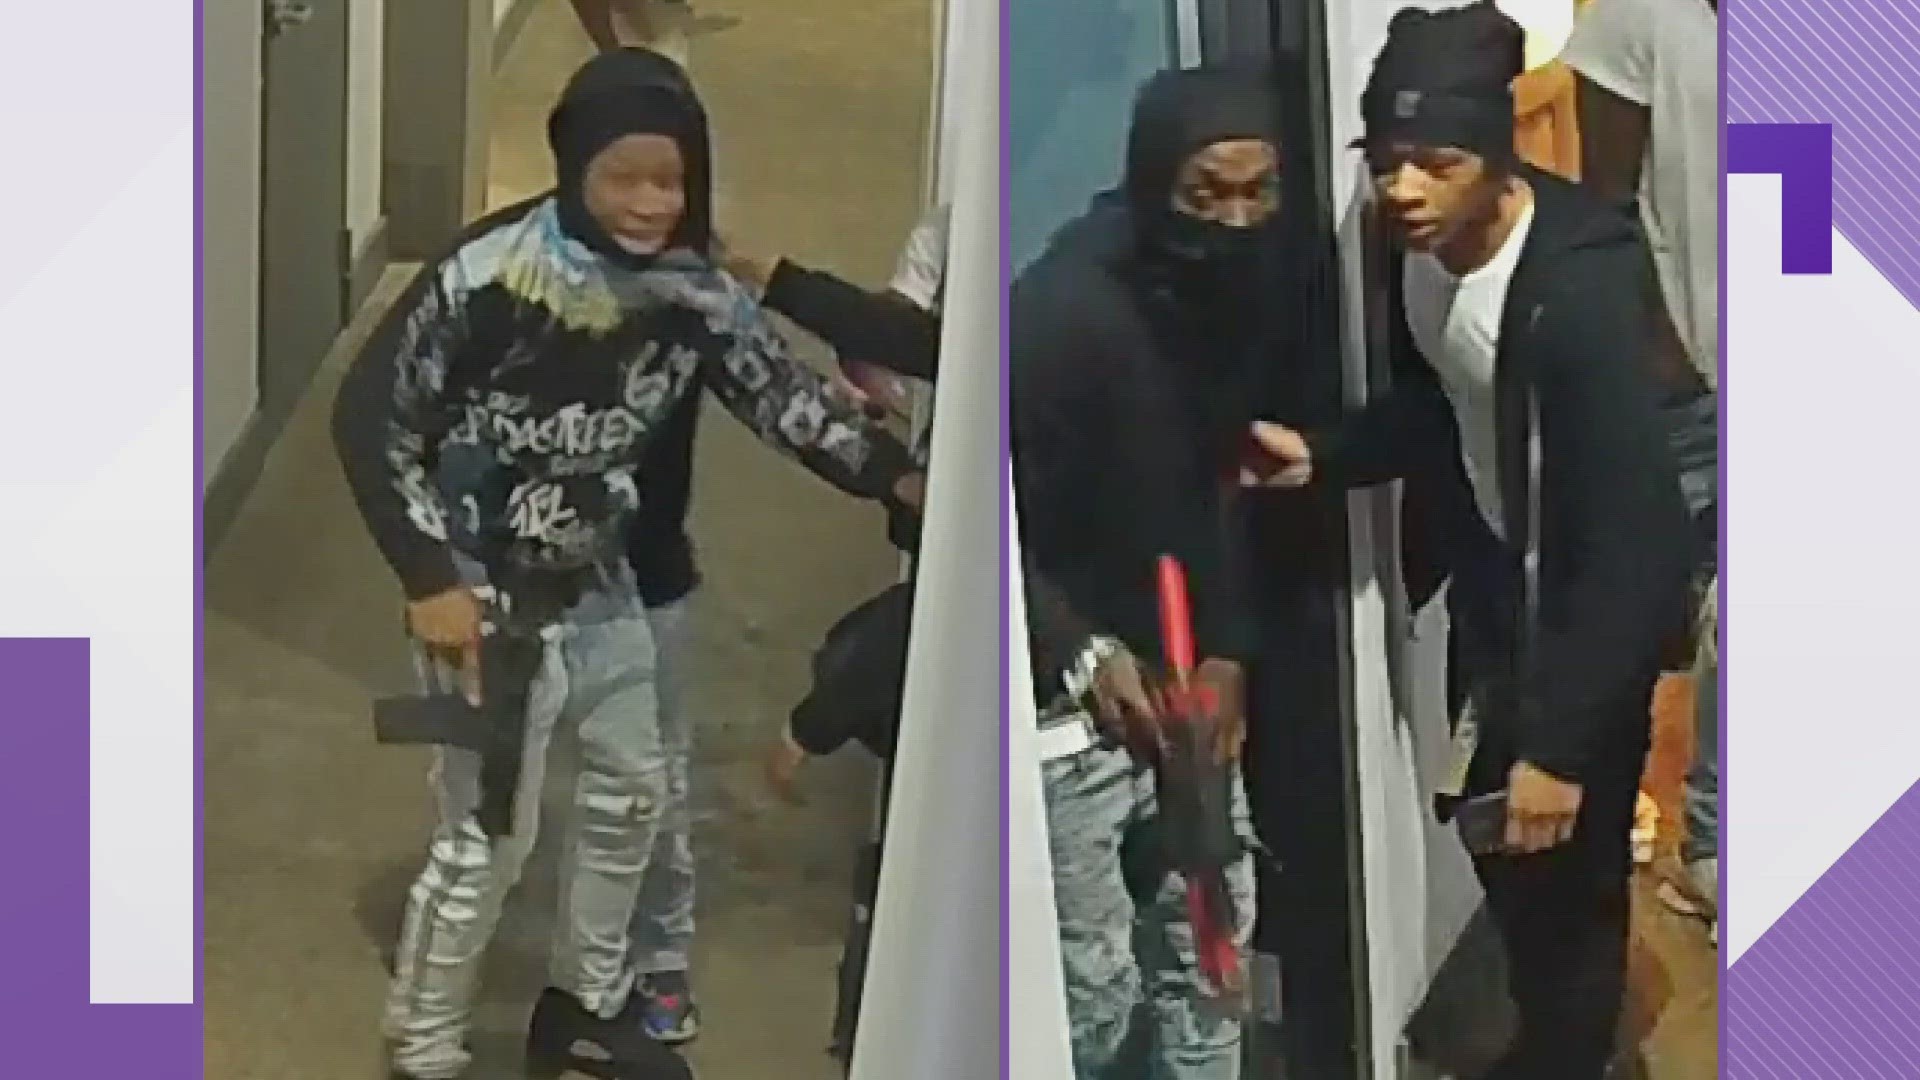 The department said it is looking to identify the people shown in newly released security images. Anyone with information is asked to call police.